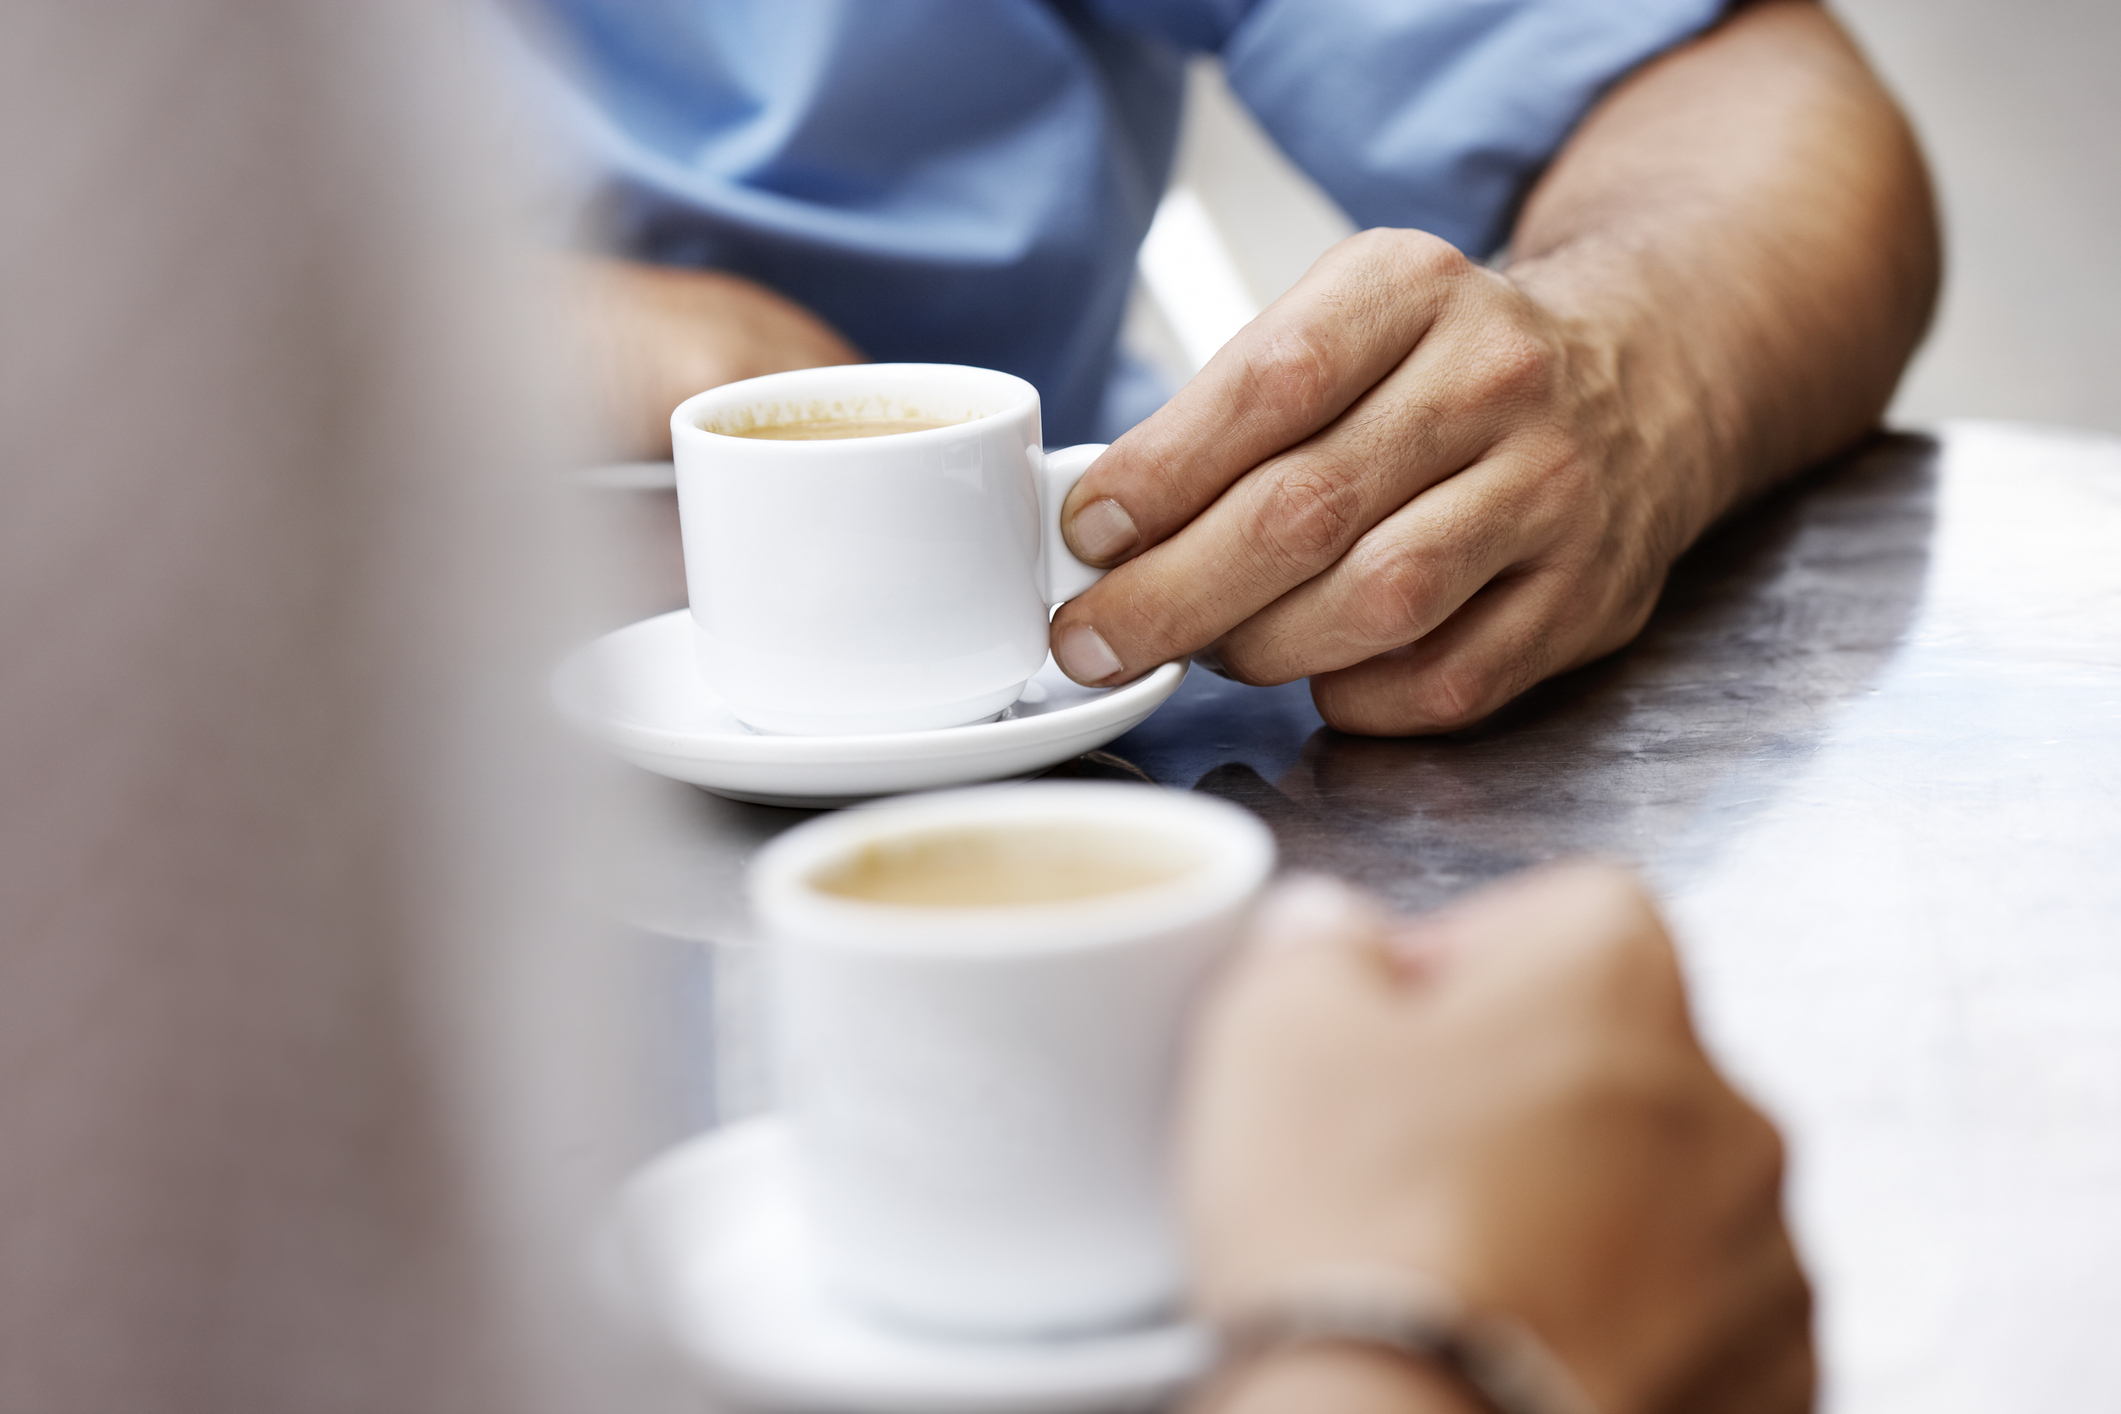 Two people at a table, one holding a small coffee cup, suggesting a casual meeting or interview